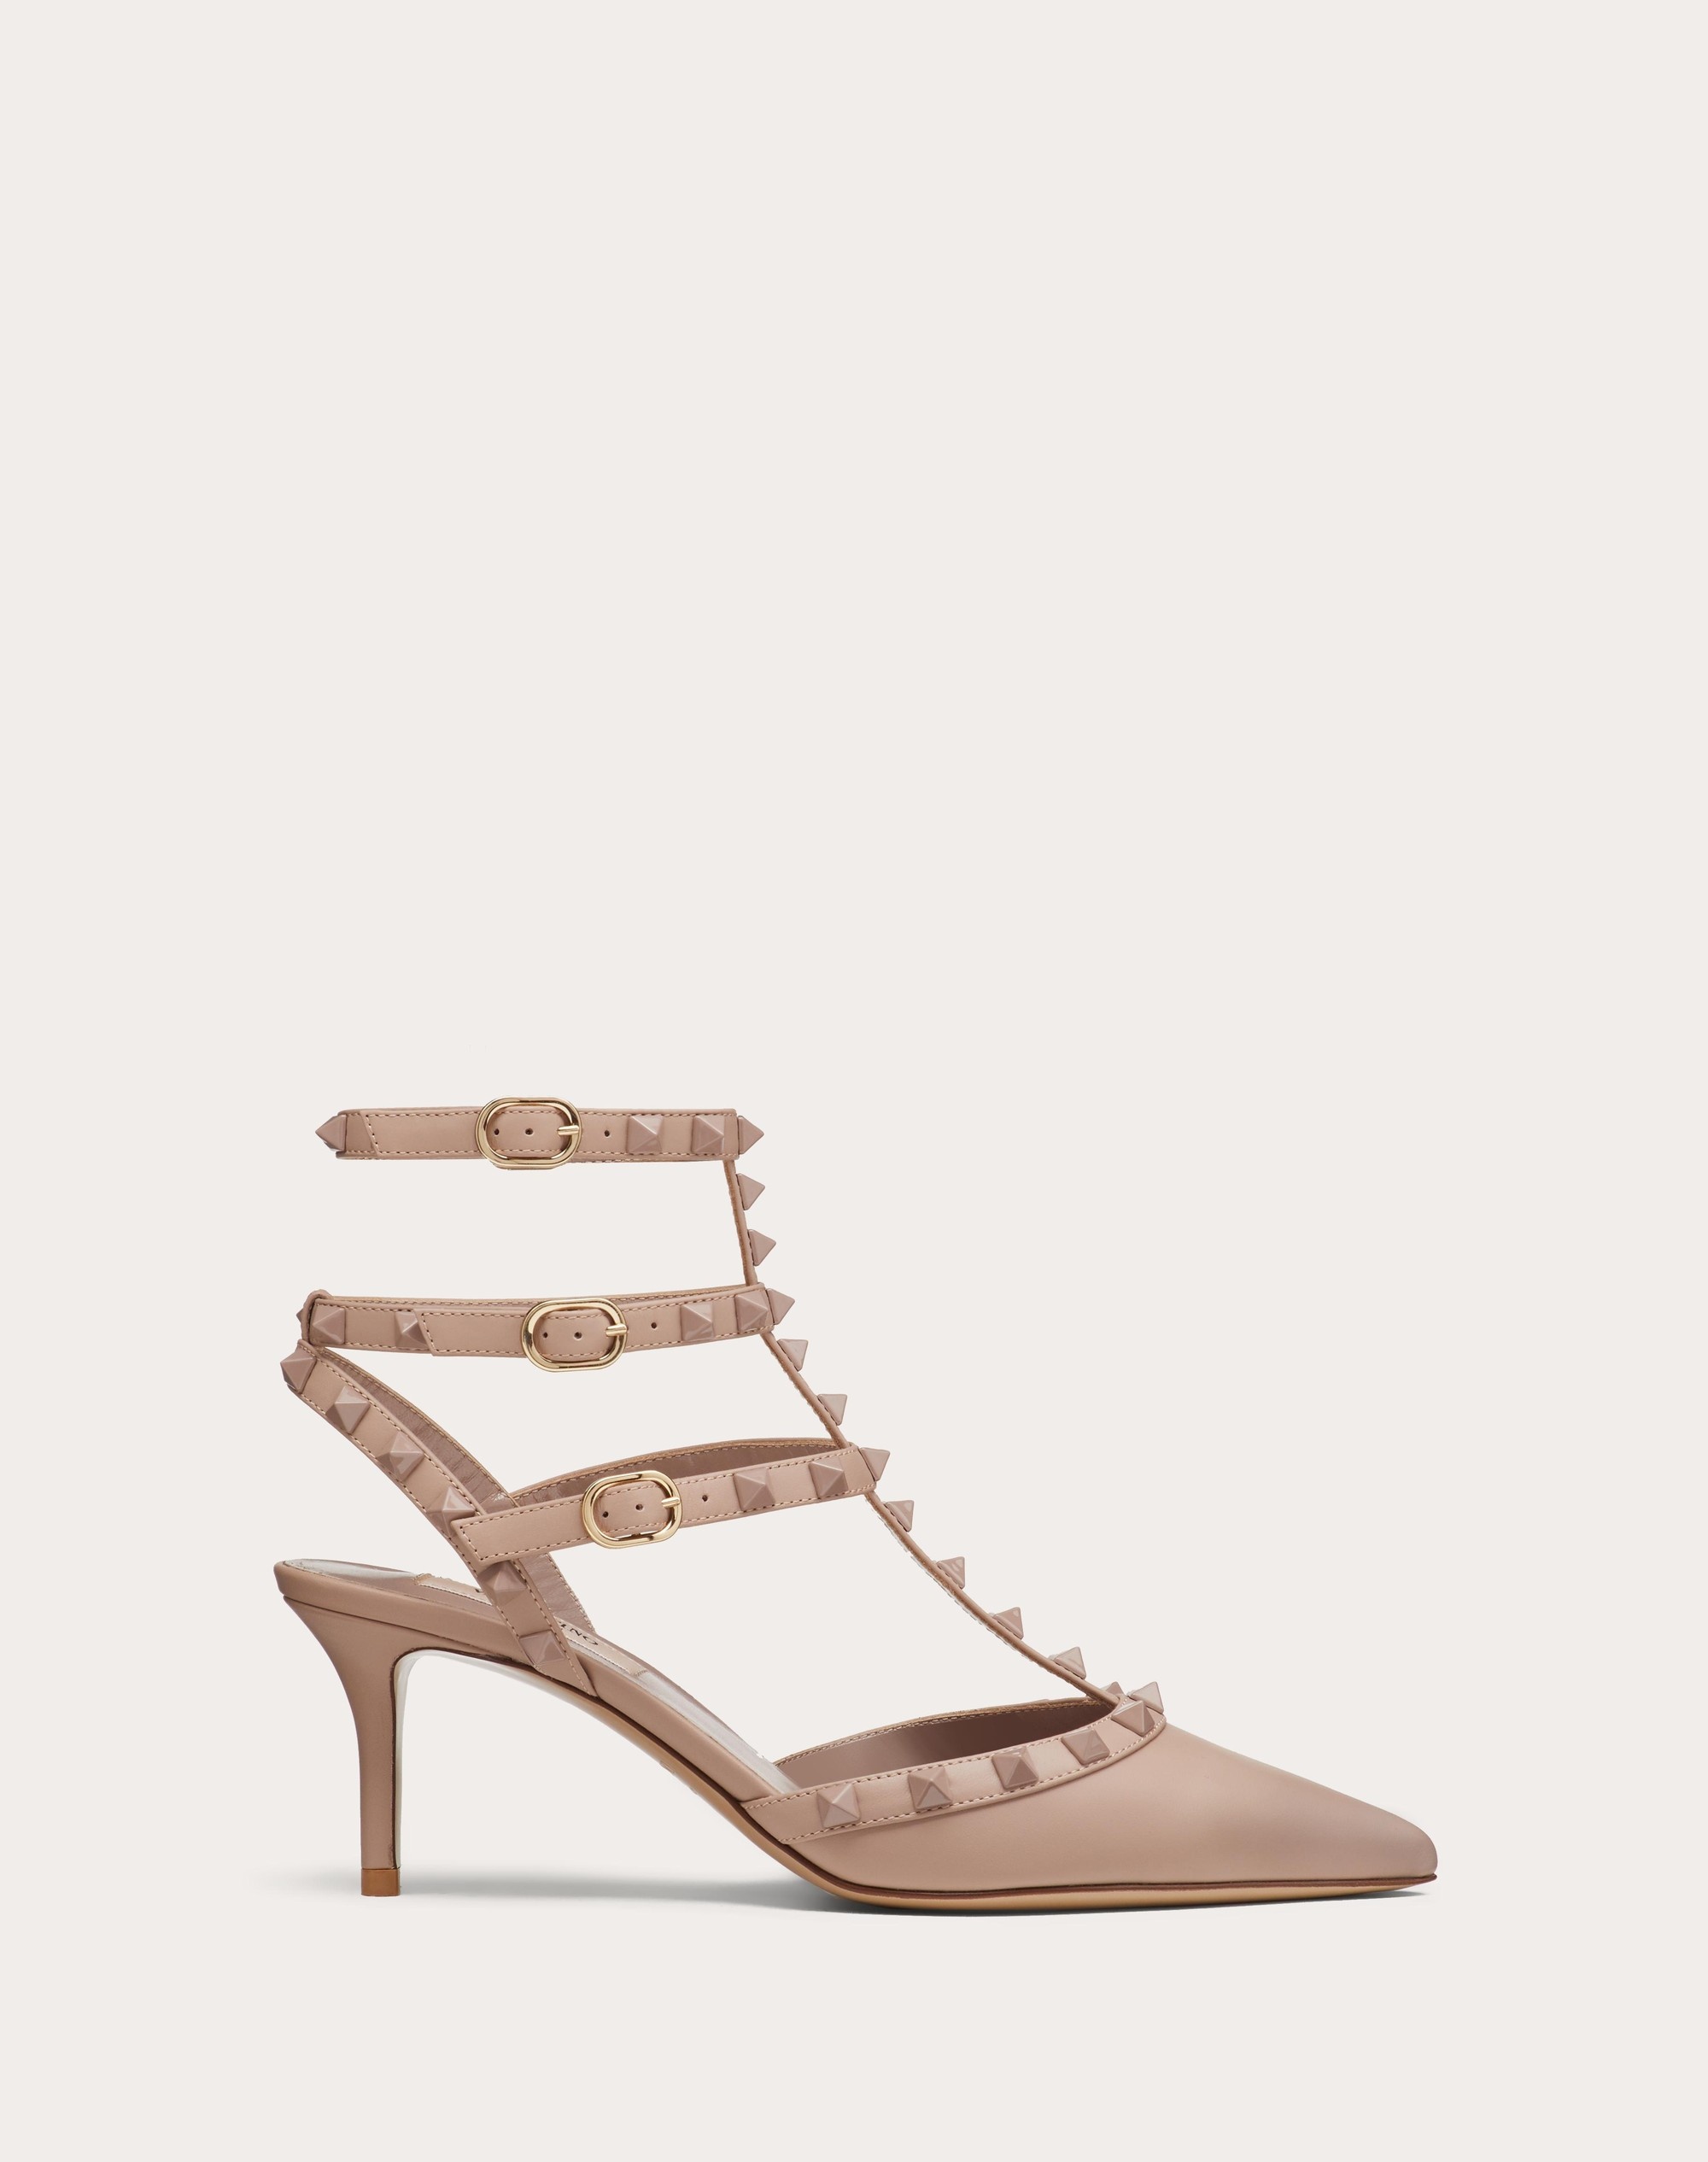 ROCKSTUD ANKLE STRAP PUMP WITH TONAL STUDS 65 MM - 1